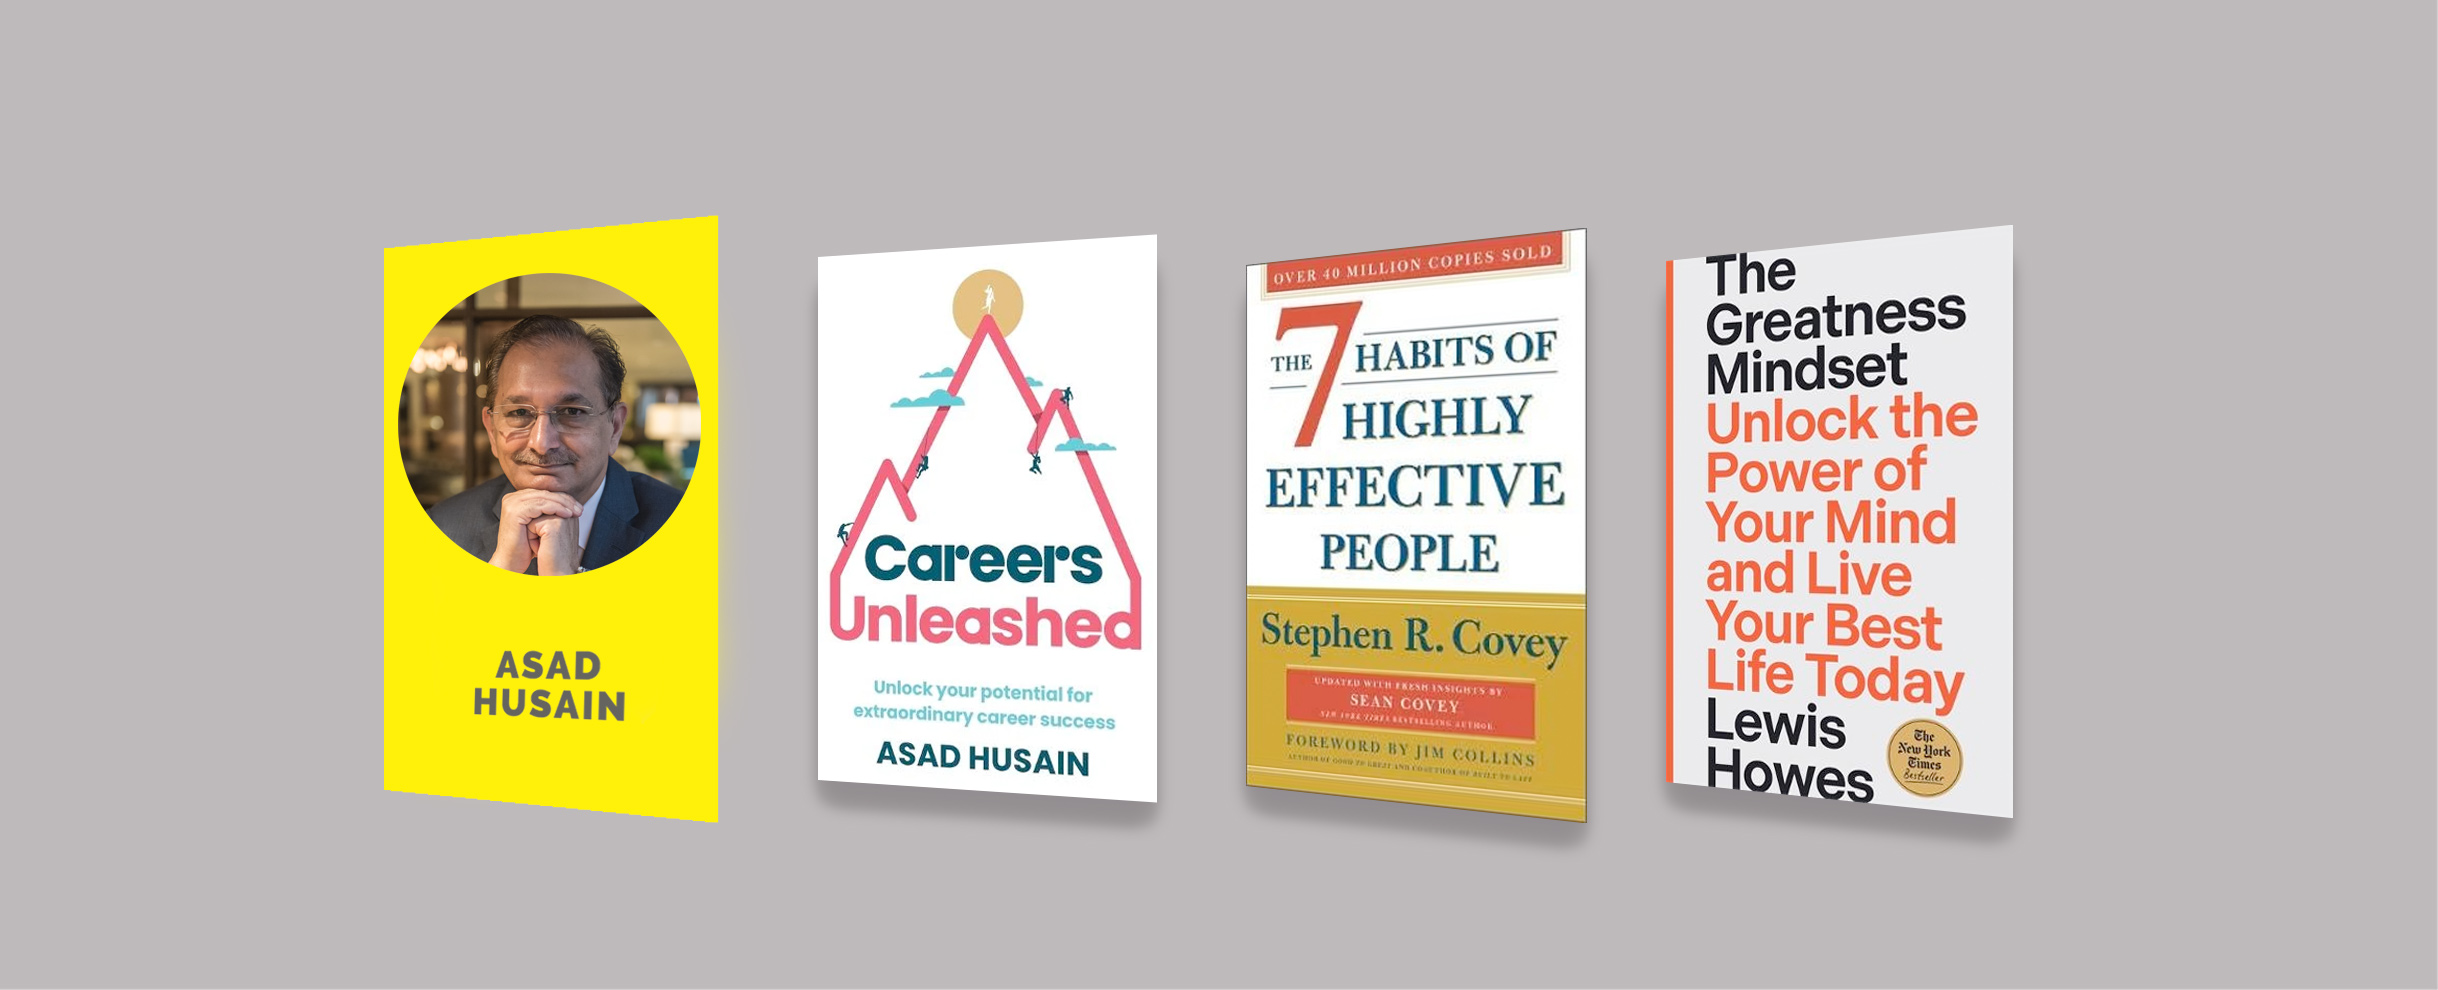 Asad Husain, author of Careers Unleashed: Unlock your potential for extraordinary career success